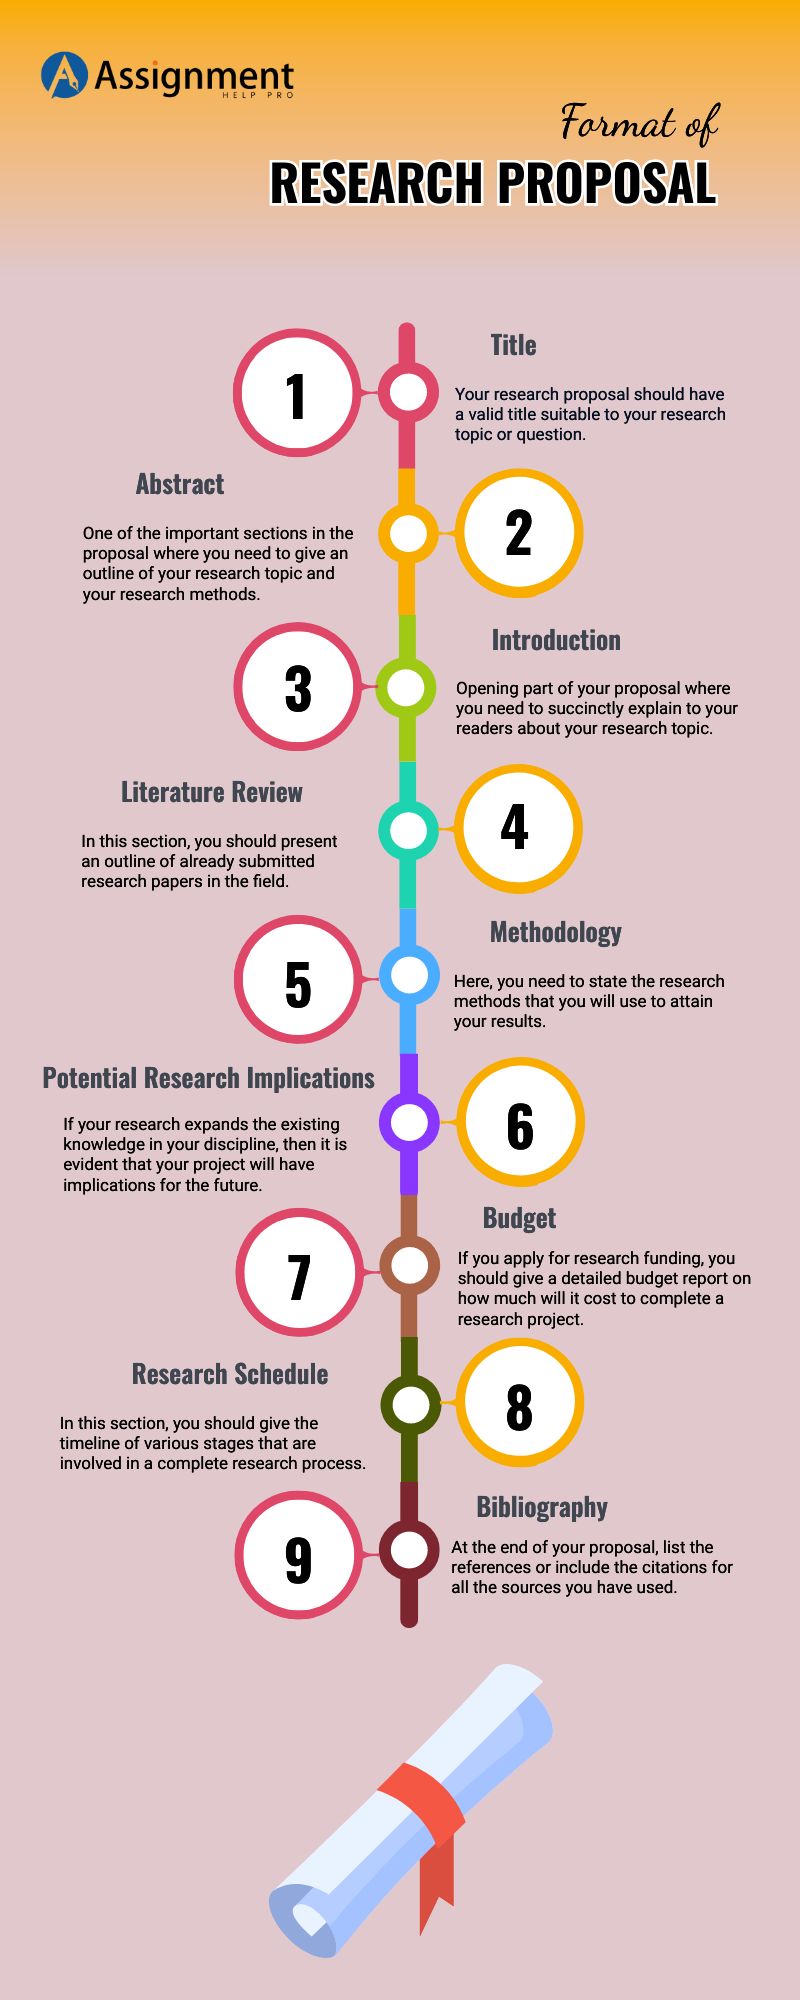 what are the most important parts of a research proposal